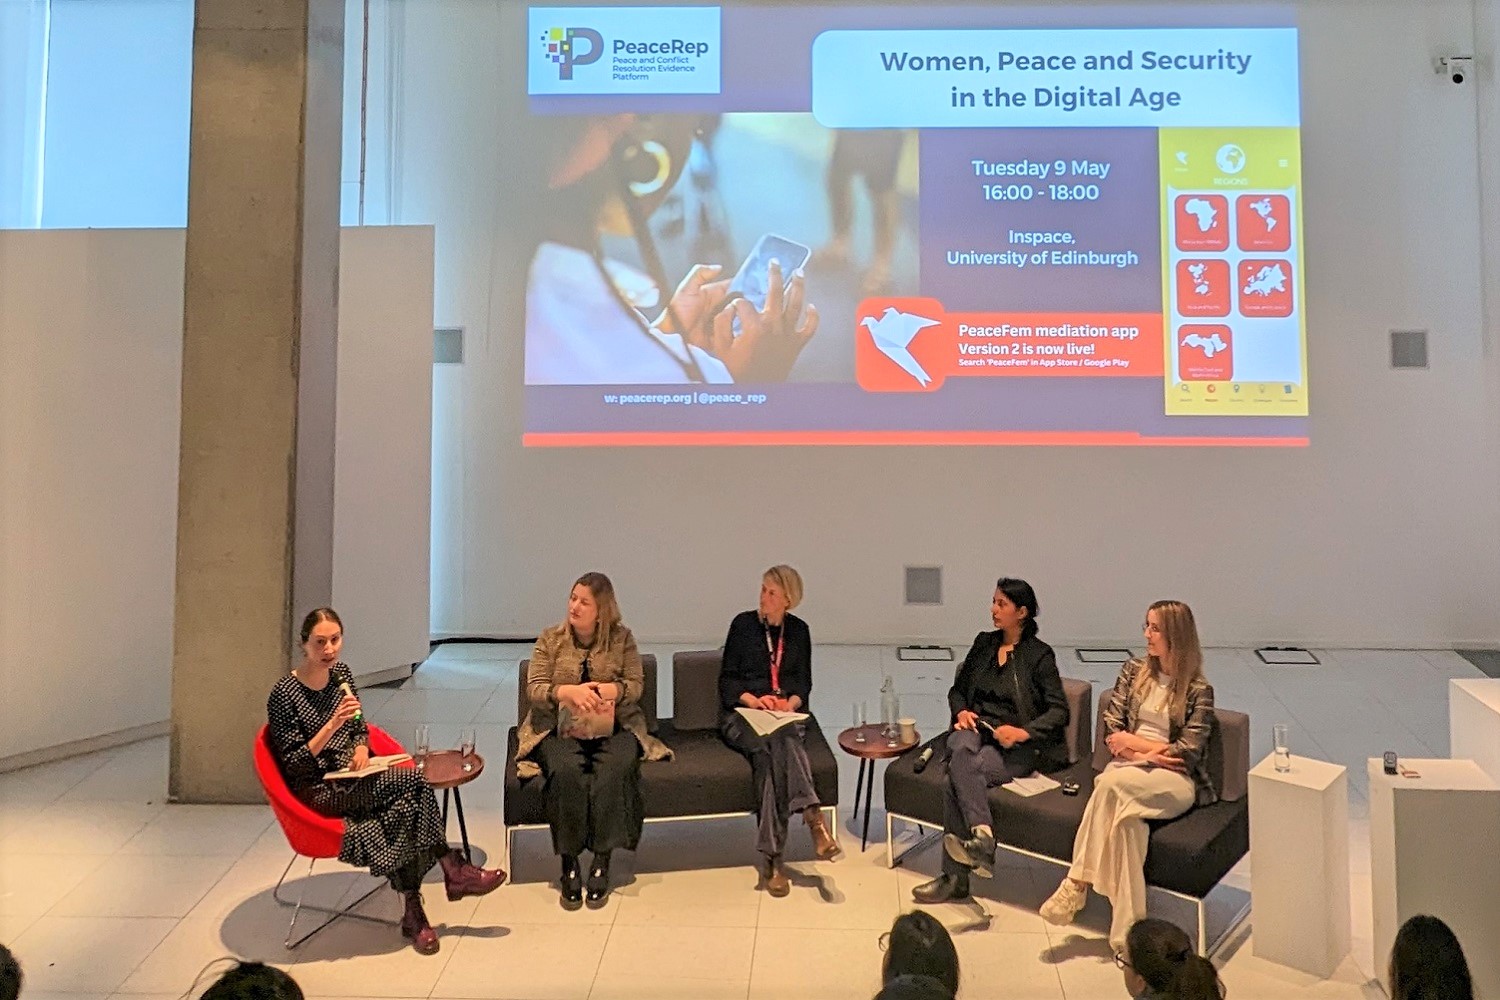 Women, Peace and Security in the Digital Age: Key Take-aways from Panel Discussion